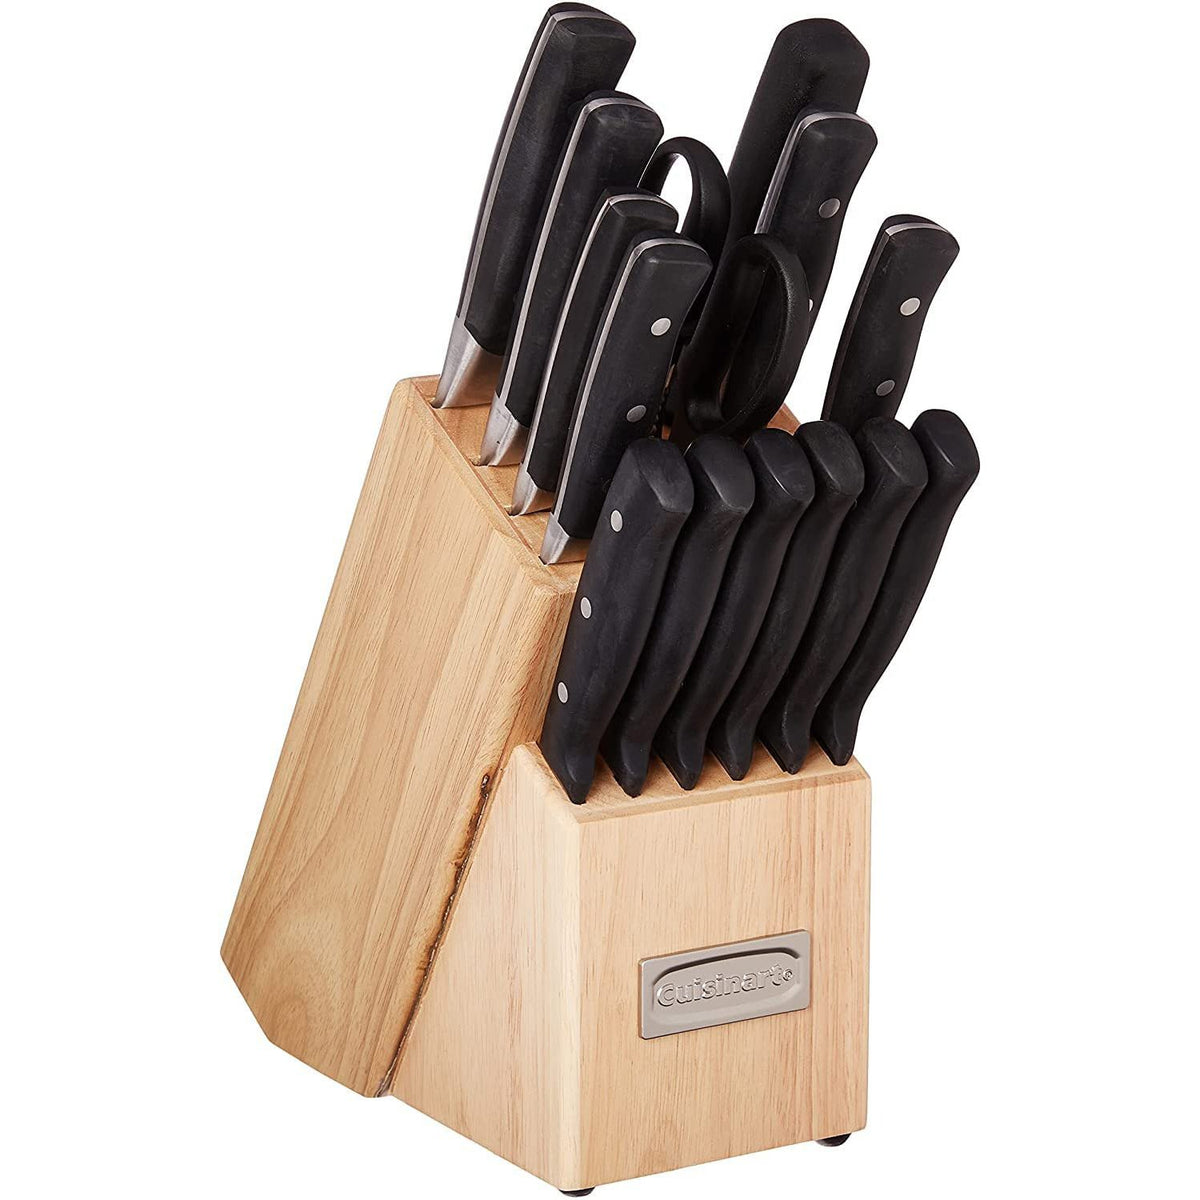 Cuisinart Forged Triple Rivet, 15-Piece Knife Set w/ Block, Superior High-Carbon Stainless Steel Blades - White